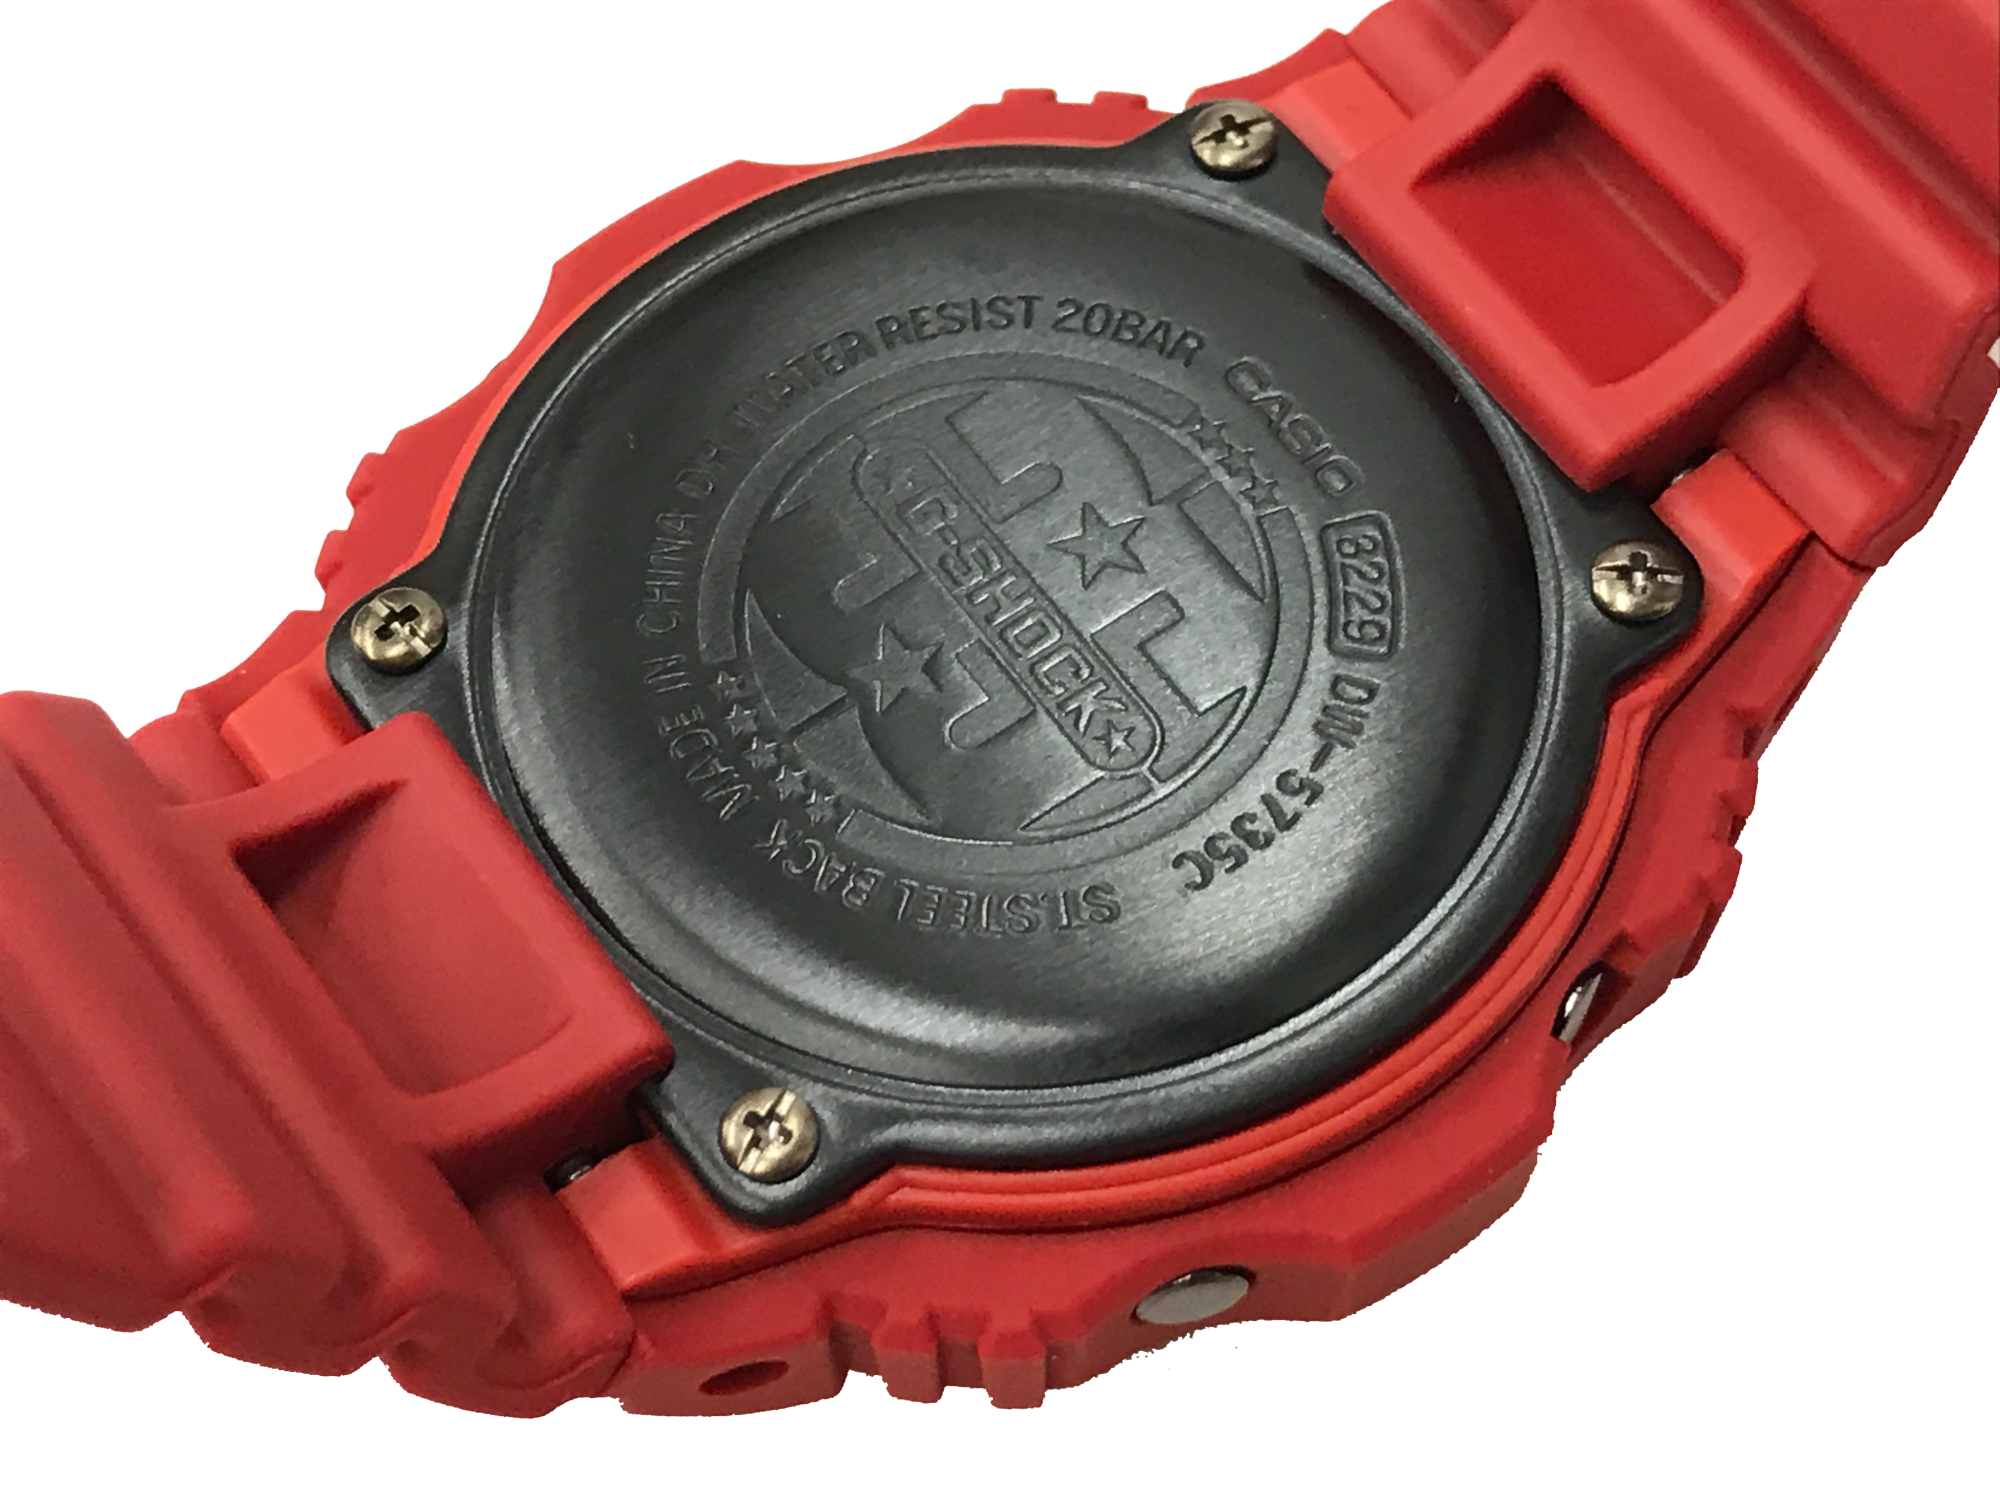 DW-5735C-4JR ANNIVERSARY LIMITED MODELS 《RED OUT》 – G-SHOCK買い取り専門店 G